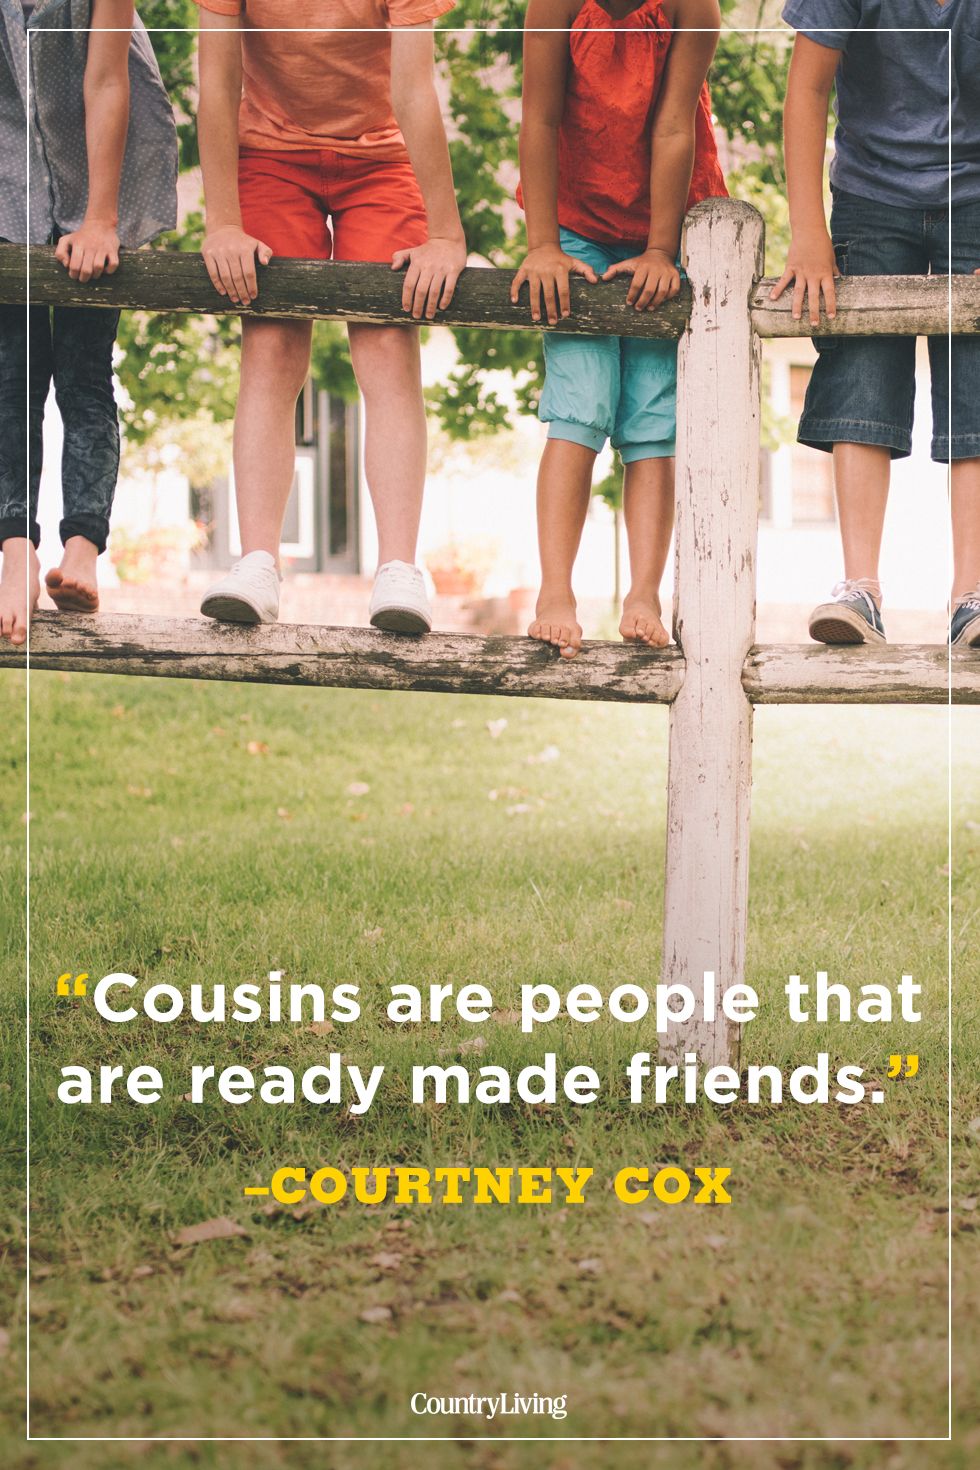 funny cousin best friend quotes